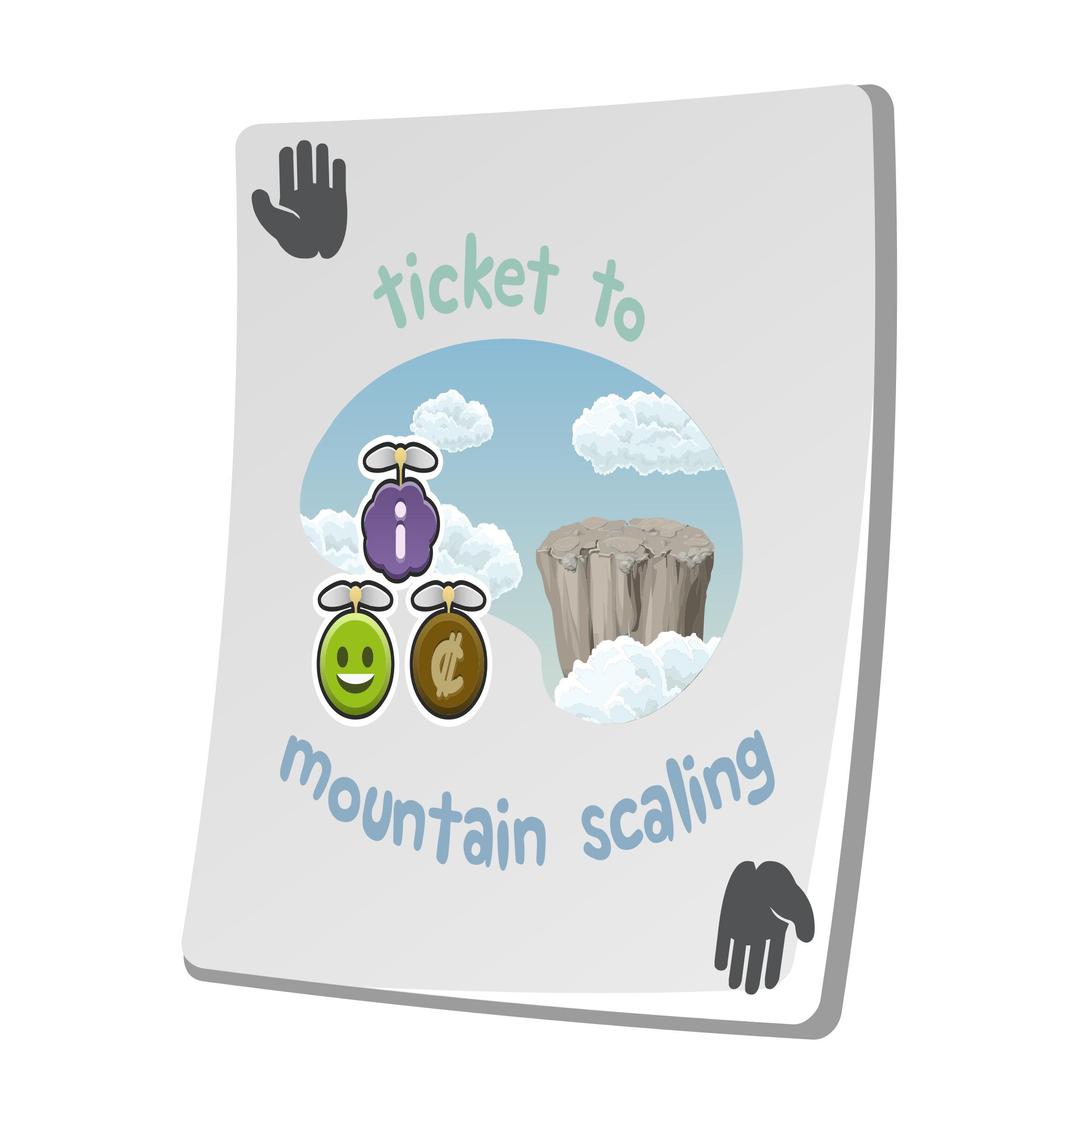 Misc Paradise Ticket Mountain Scaling png transparent